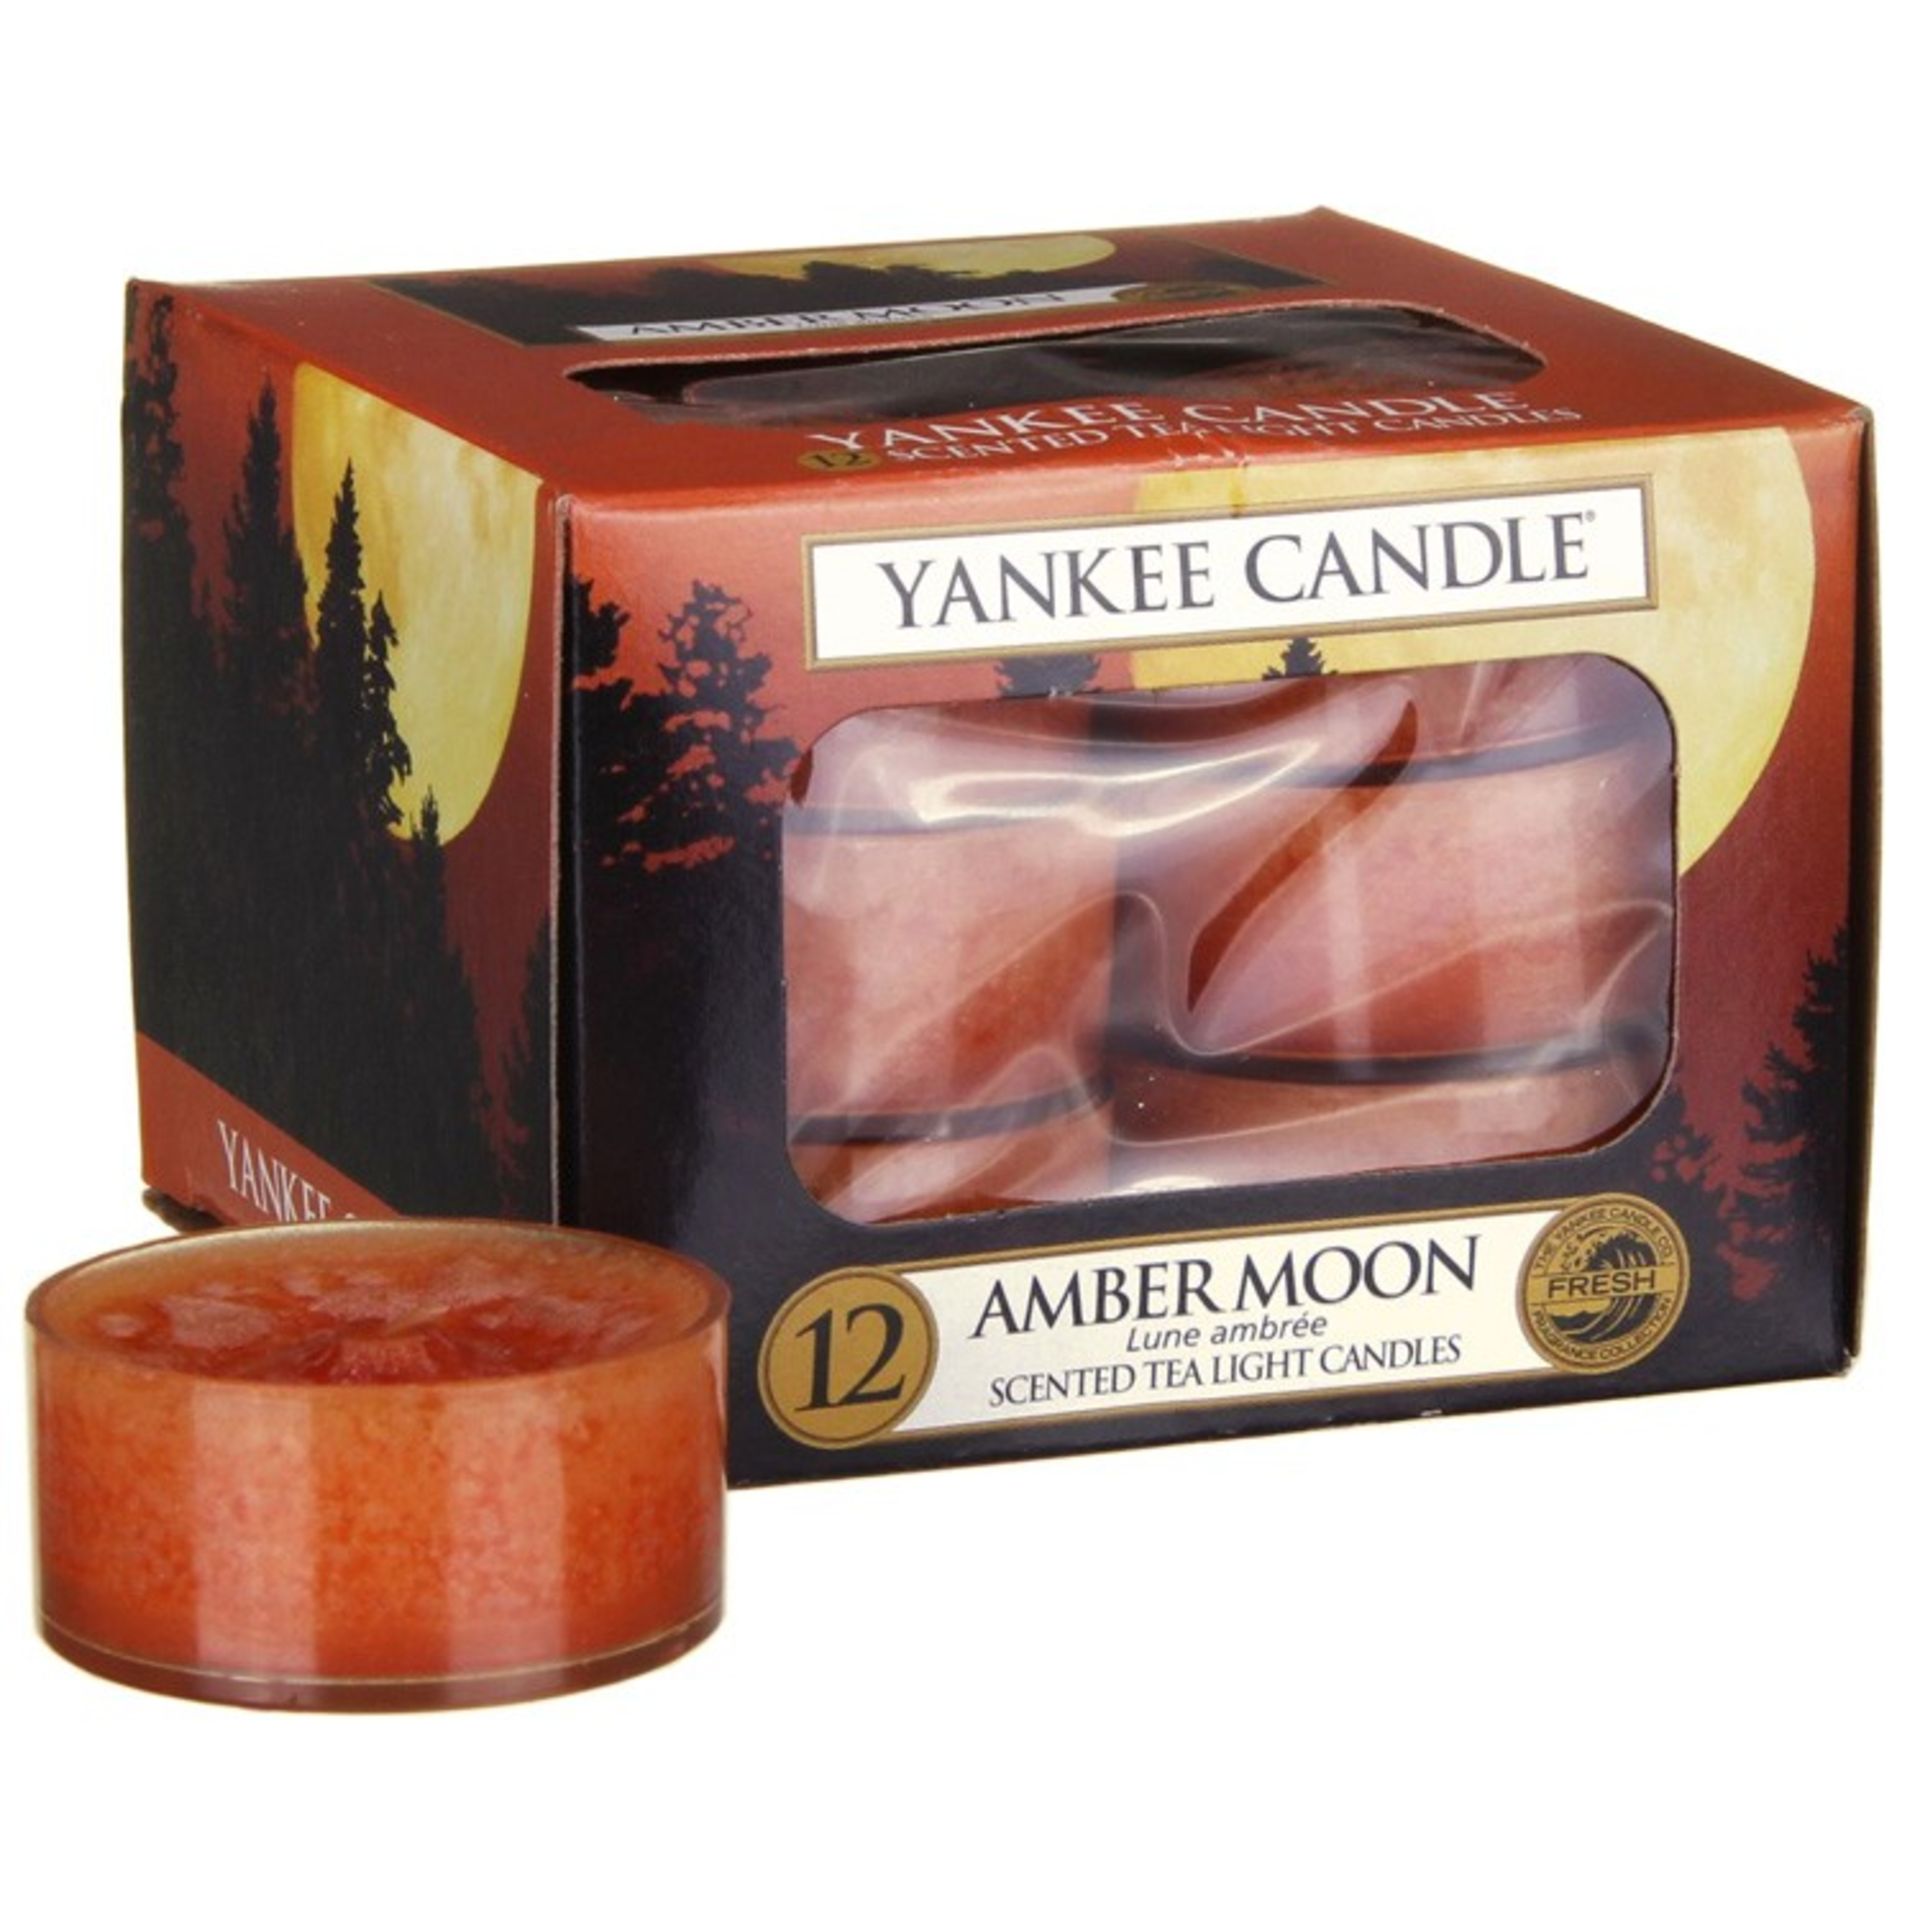 V Brand New 12 Yankee Candle Scented Tea Light Candles Amber Moon eBay Price £7.99 X 2 YOUR BID